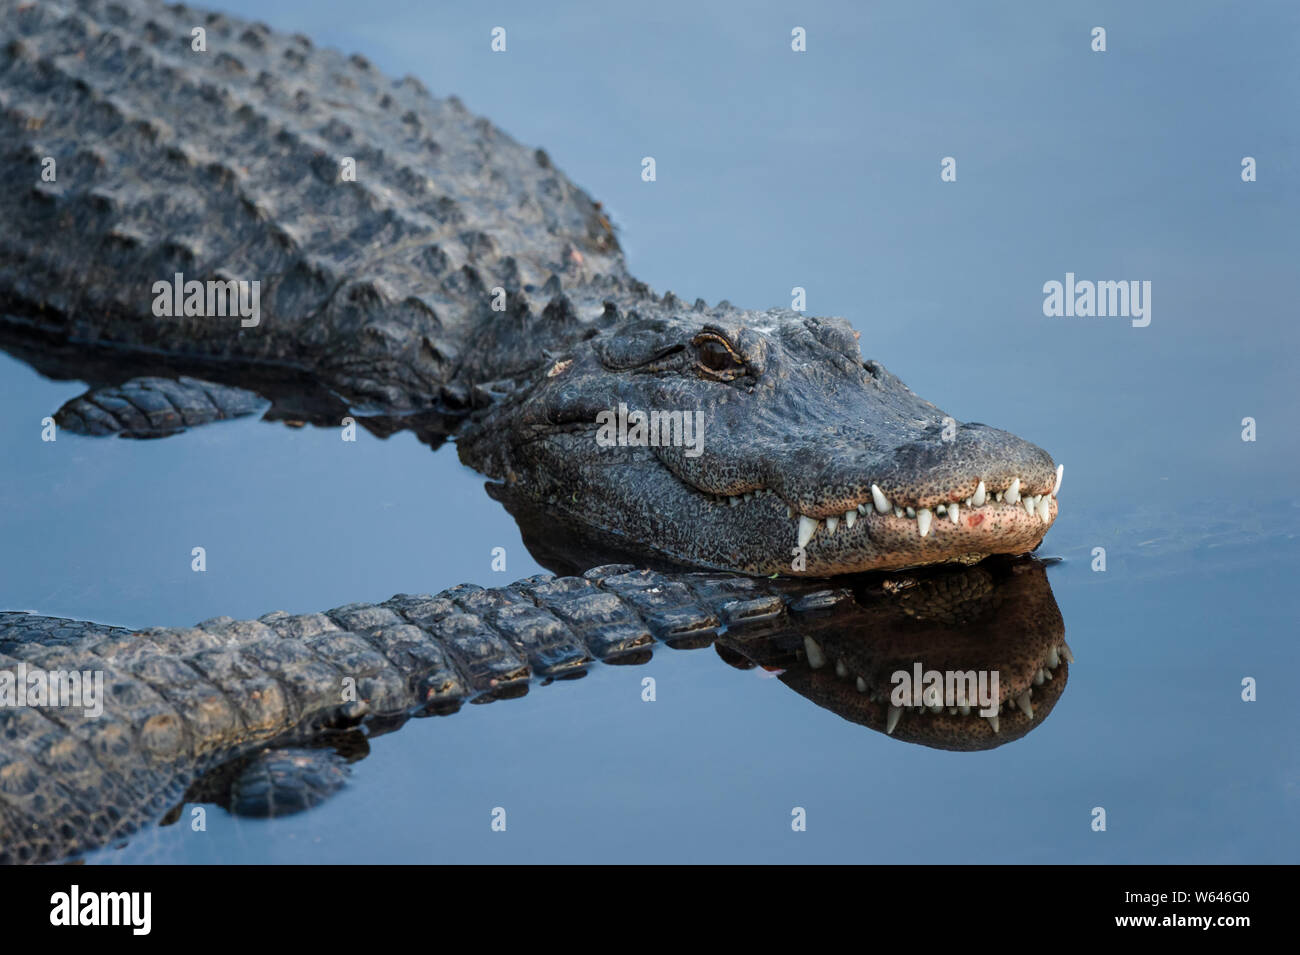 Alligator with his head resting on another's tail in reflective blue water Stock Photo